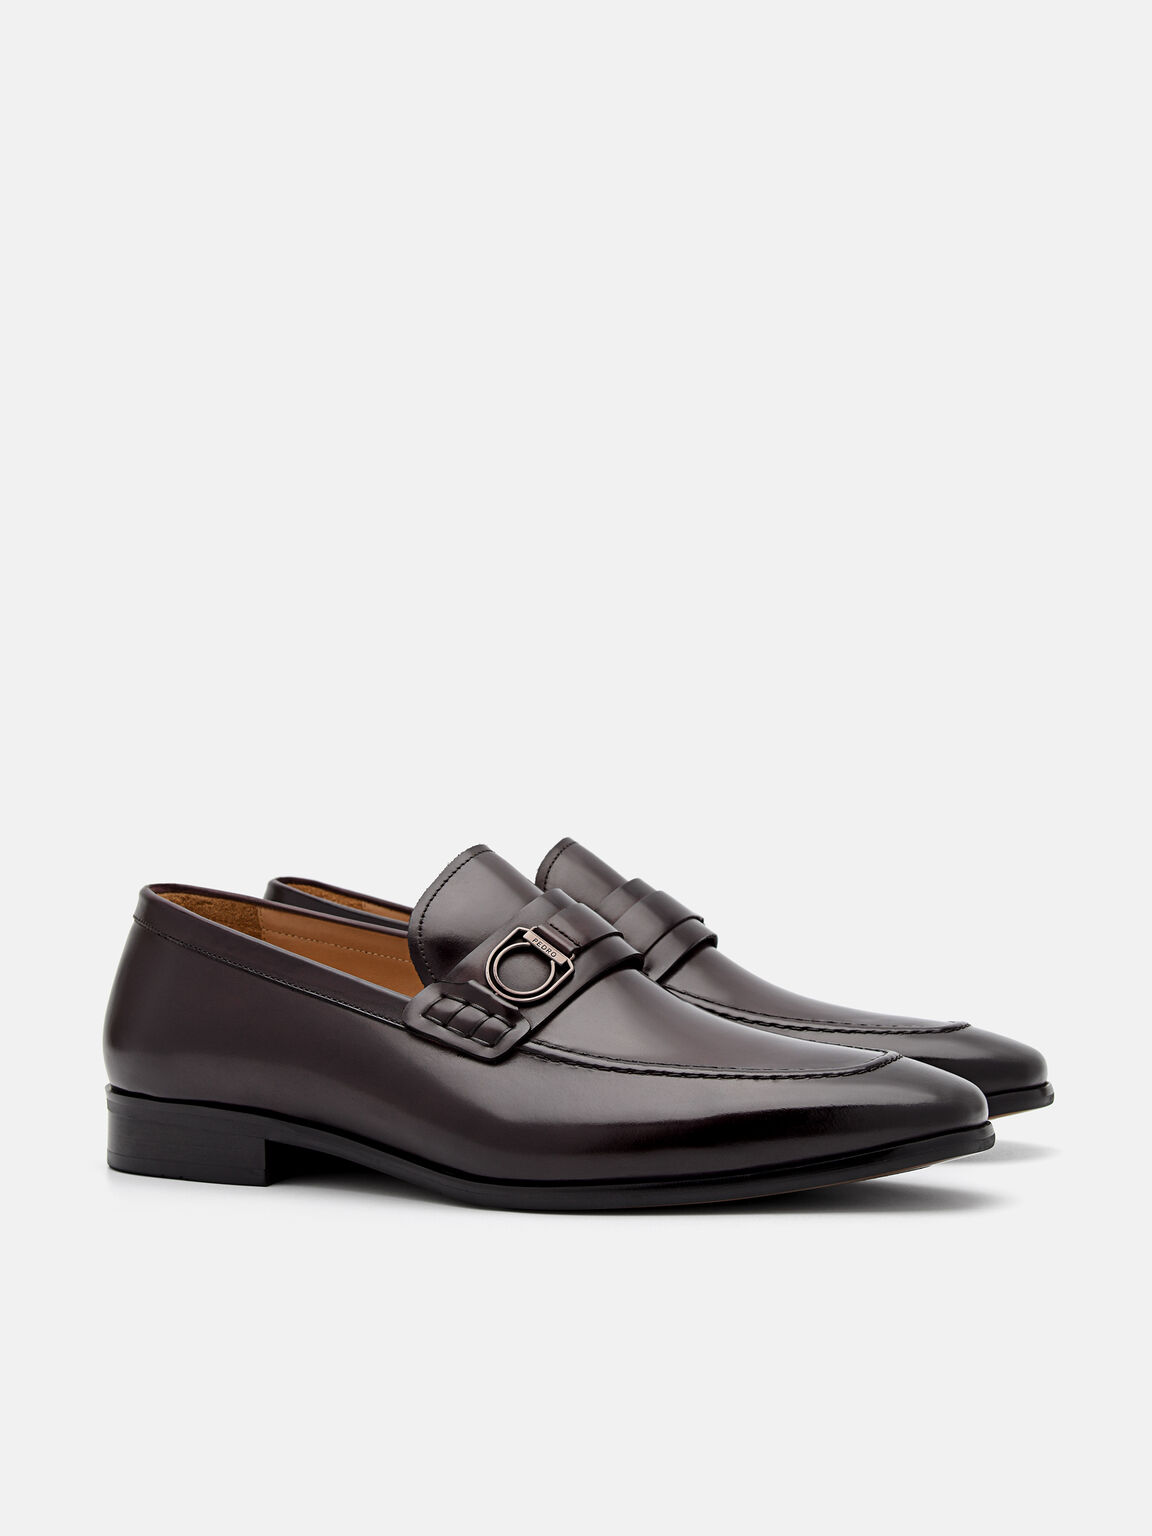 Leather Buckle Loafers, Dark Brown, hi-res